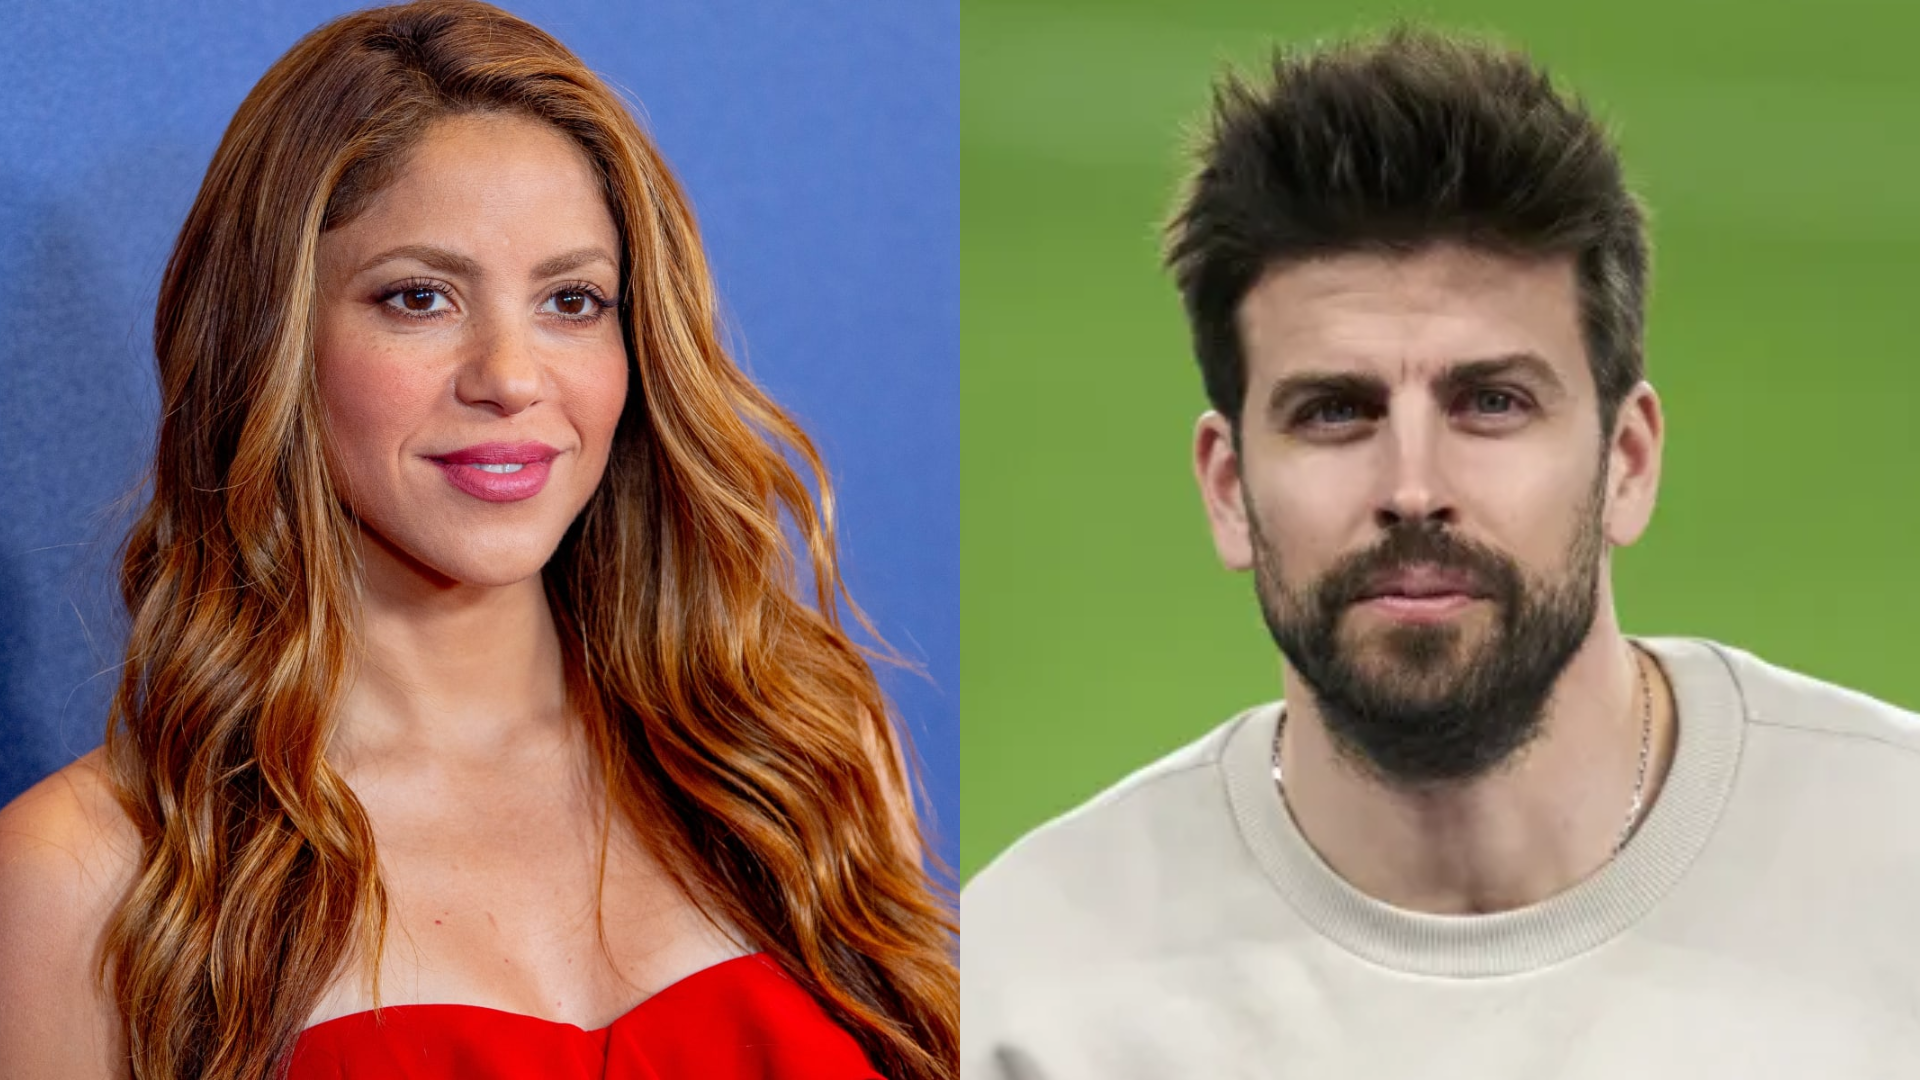 Shakira Speaks About Controversial Split With Gerard Piqué: “Not Having A Husband Is Liberating”